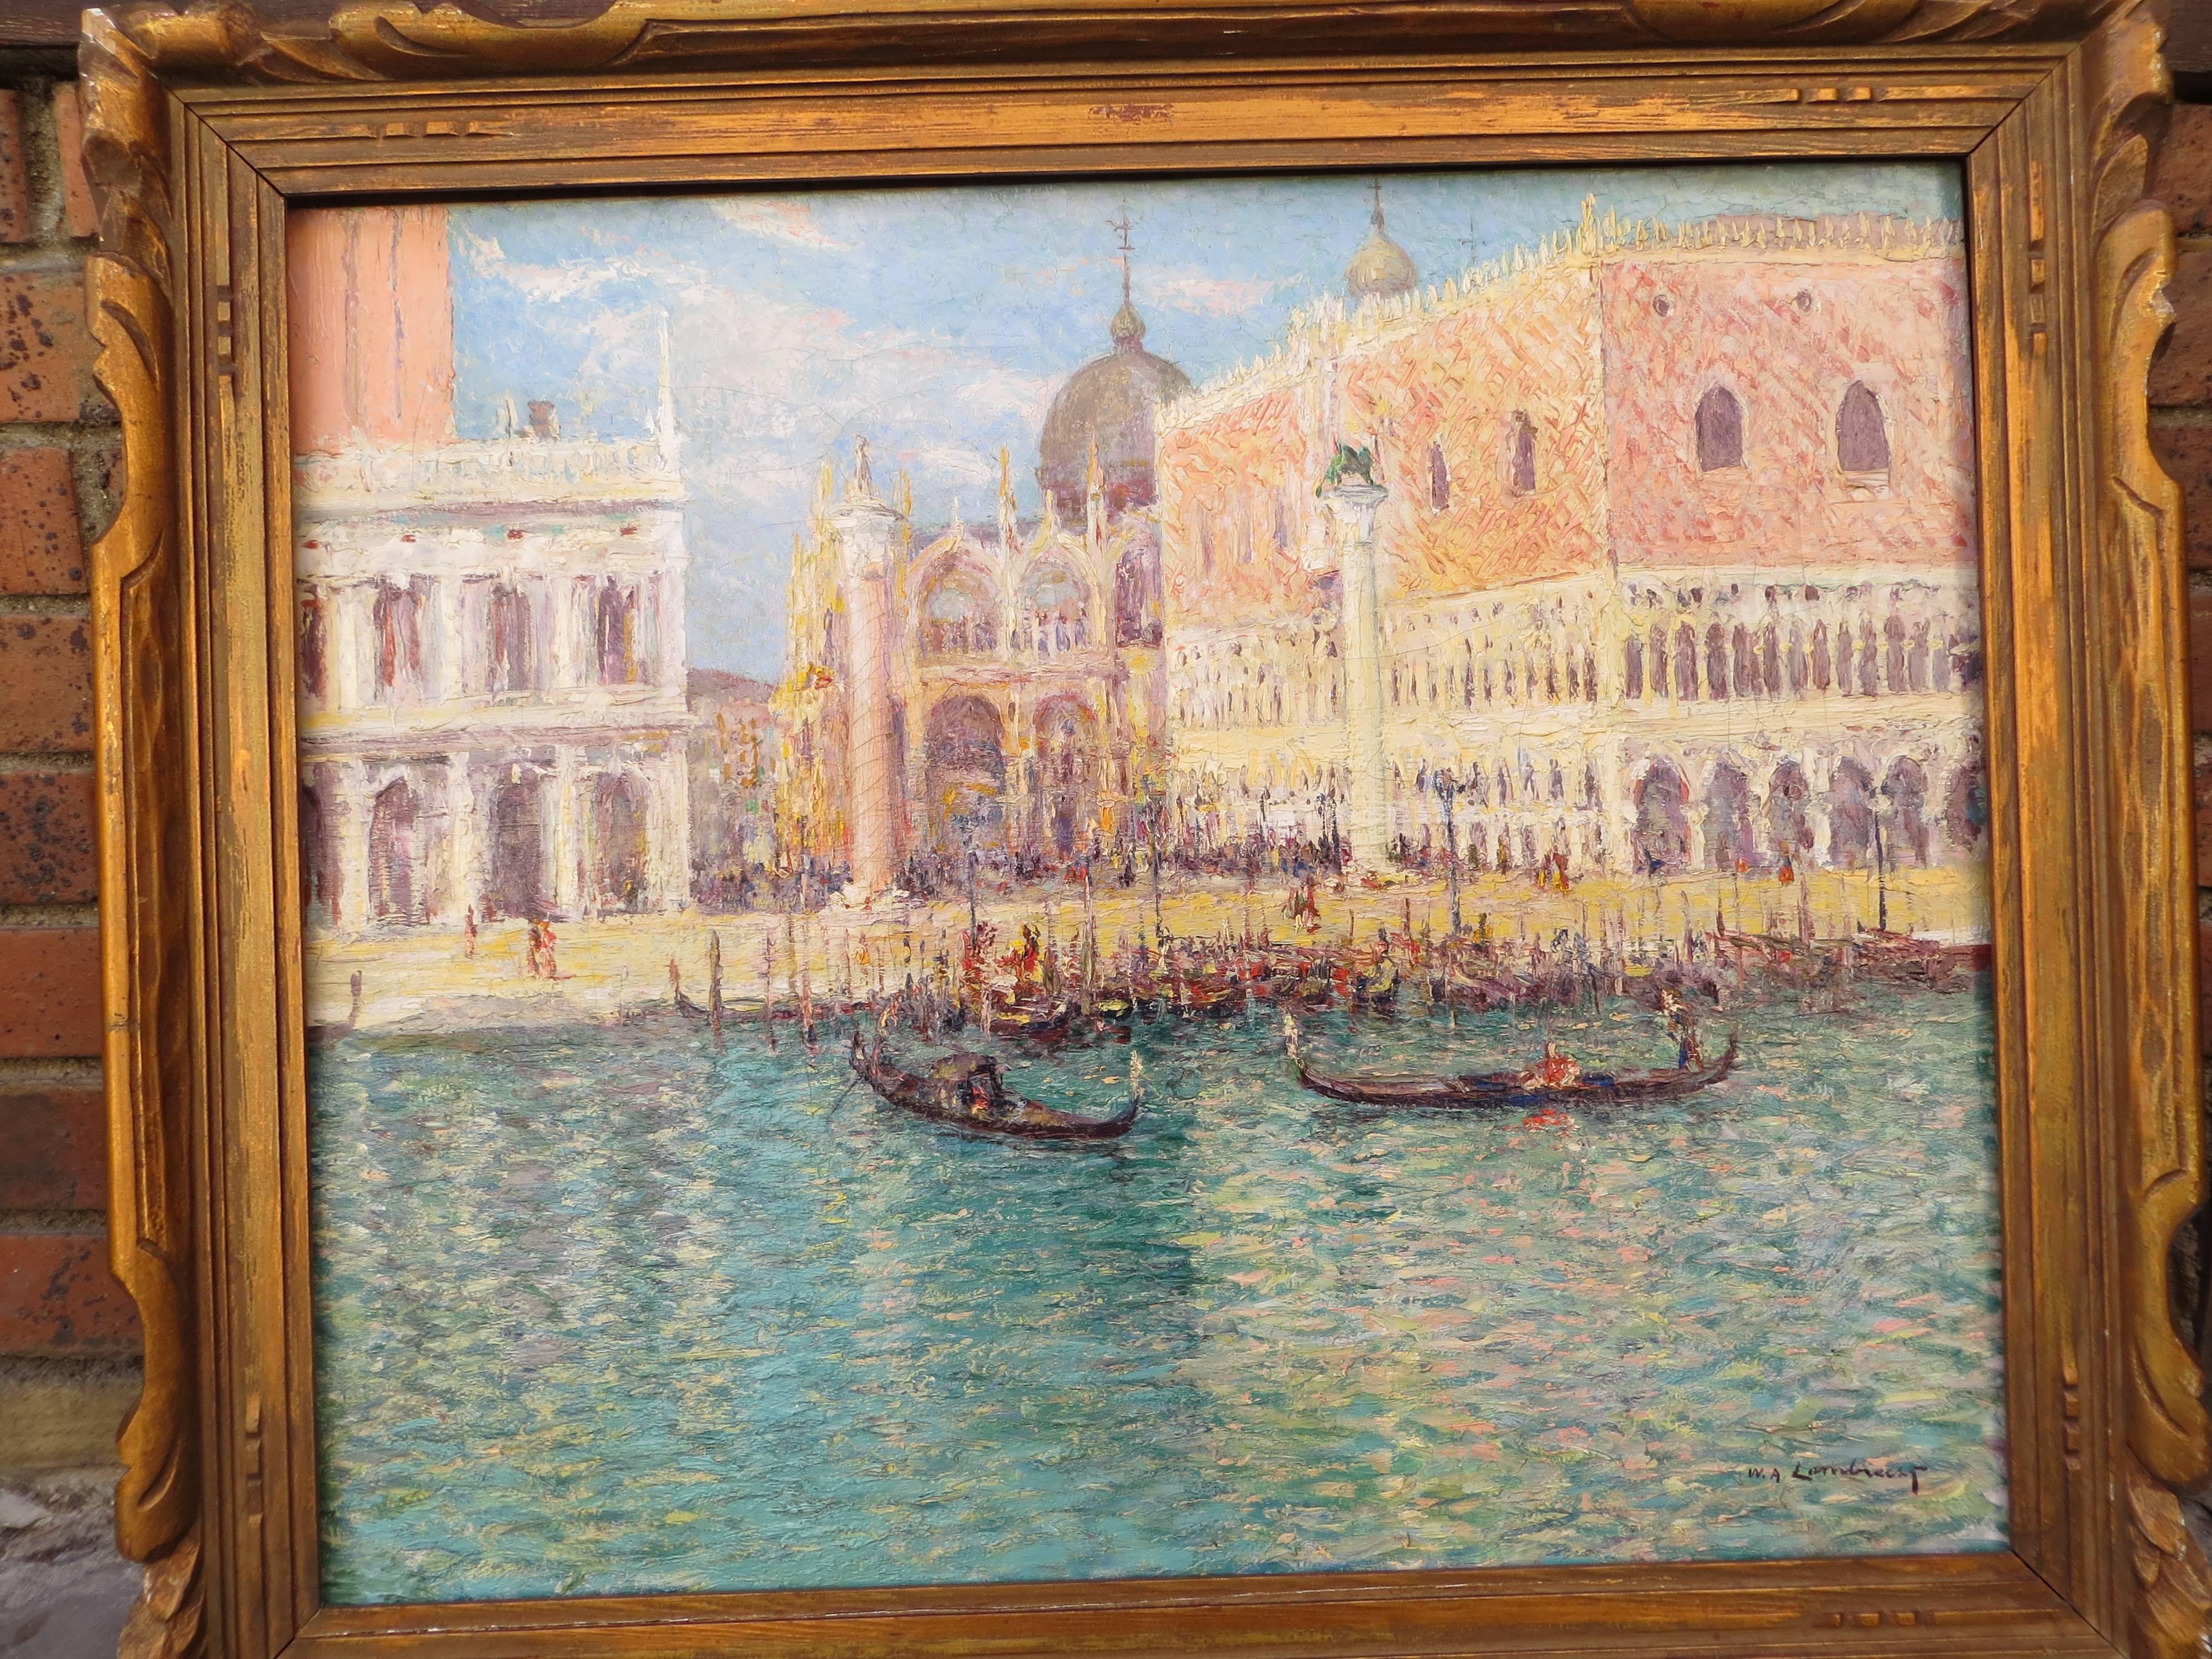  San Marco place  in Venice Oil on Canvas by W.A Lambrecht - Painting by WILLIAM ADOLPHE LAMBRECHT